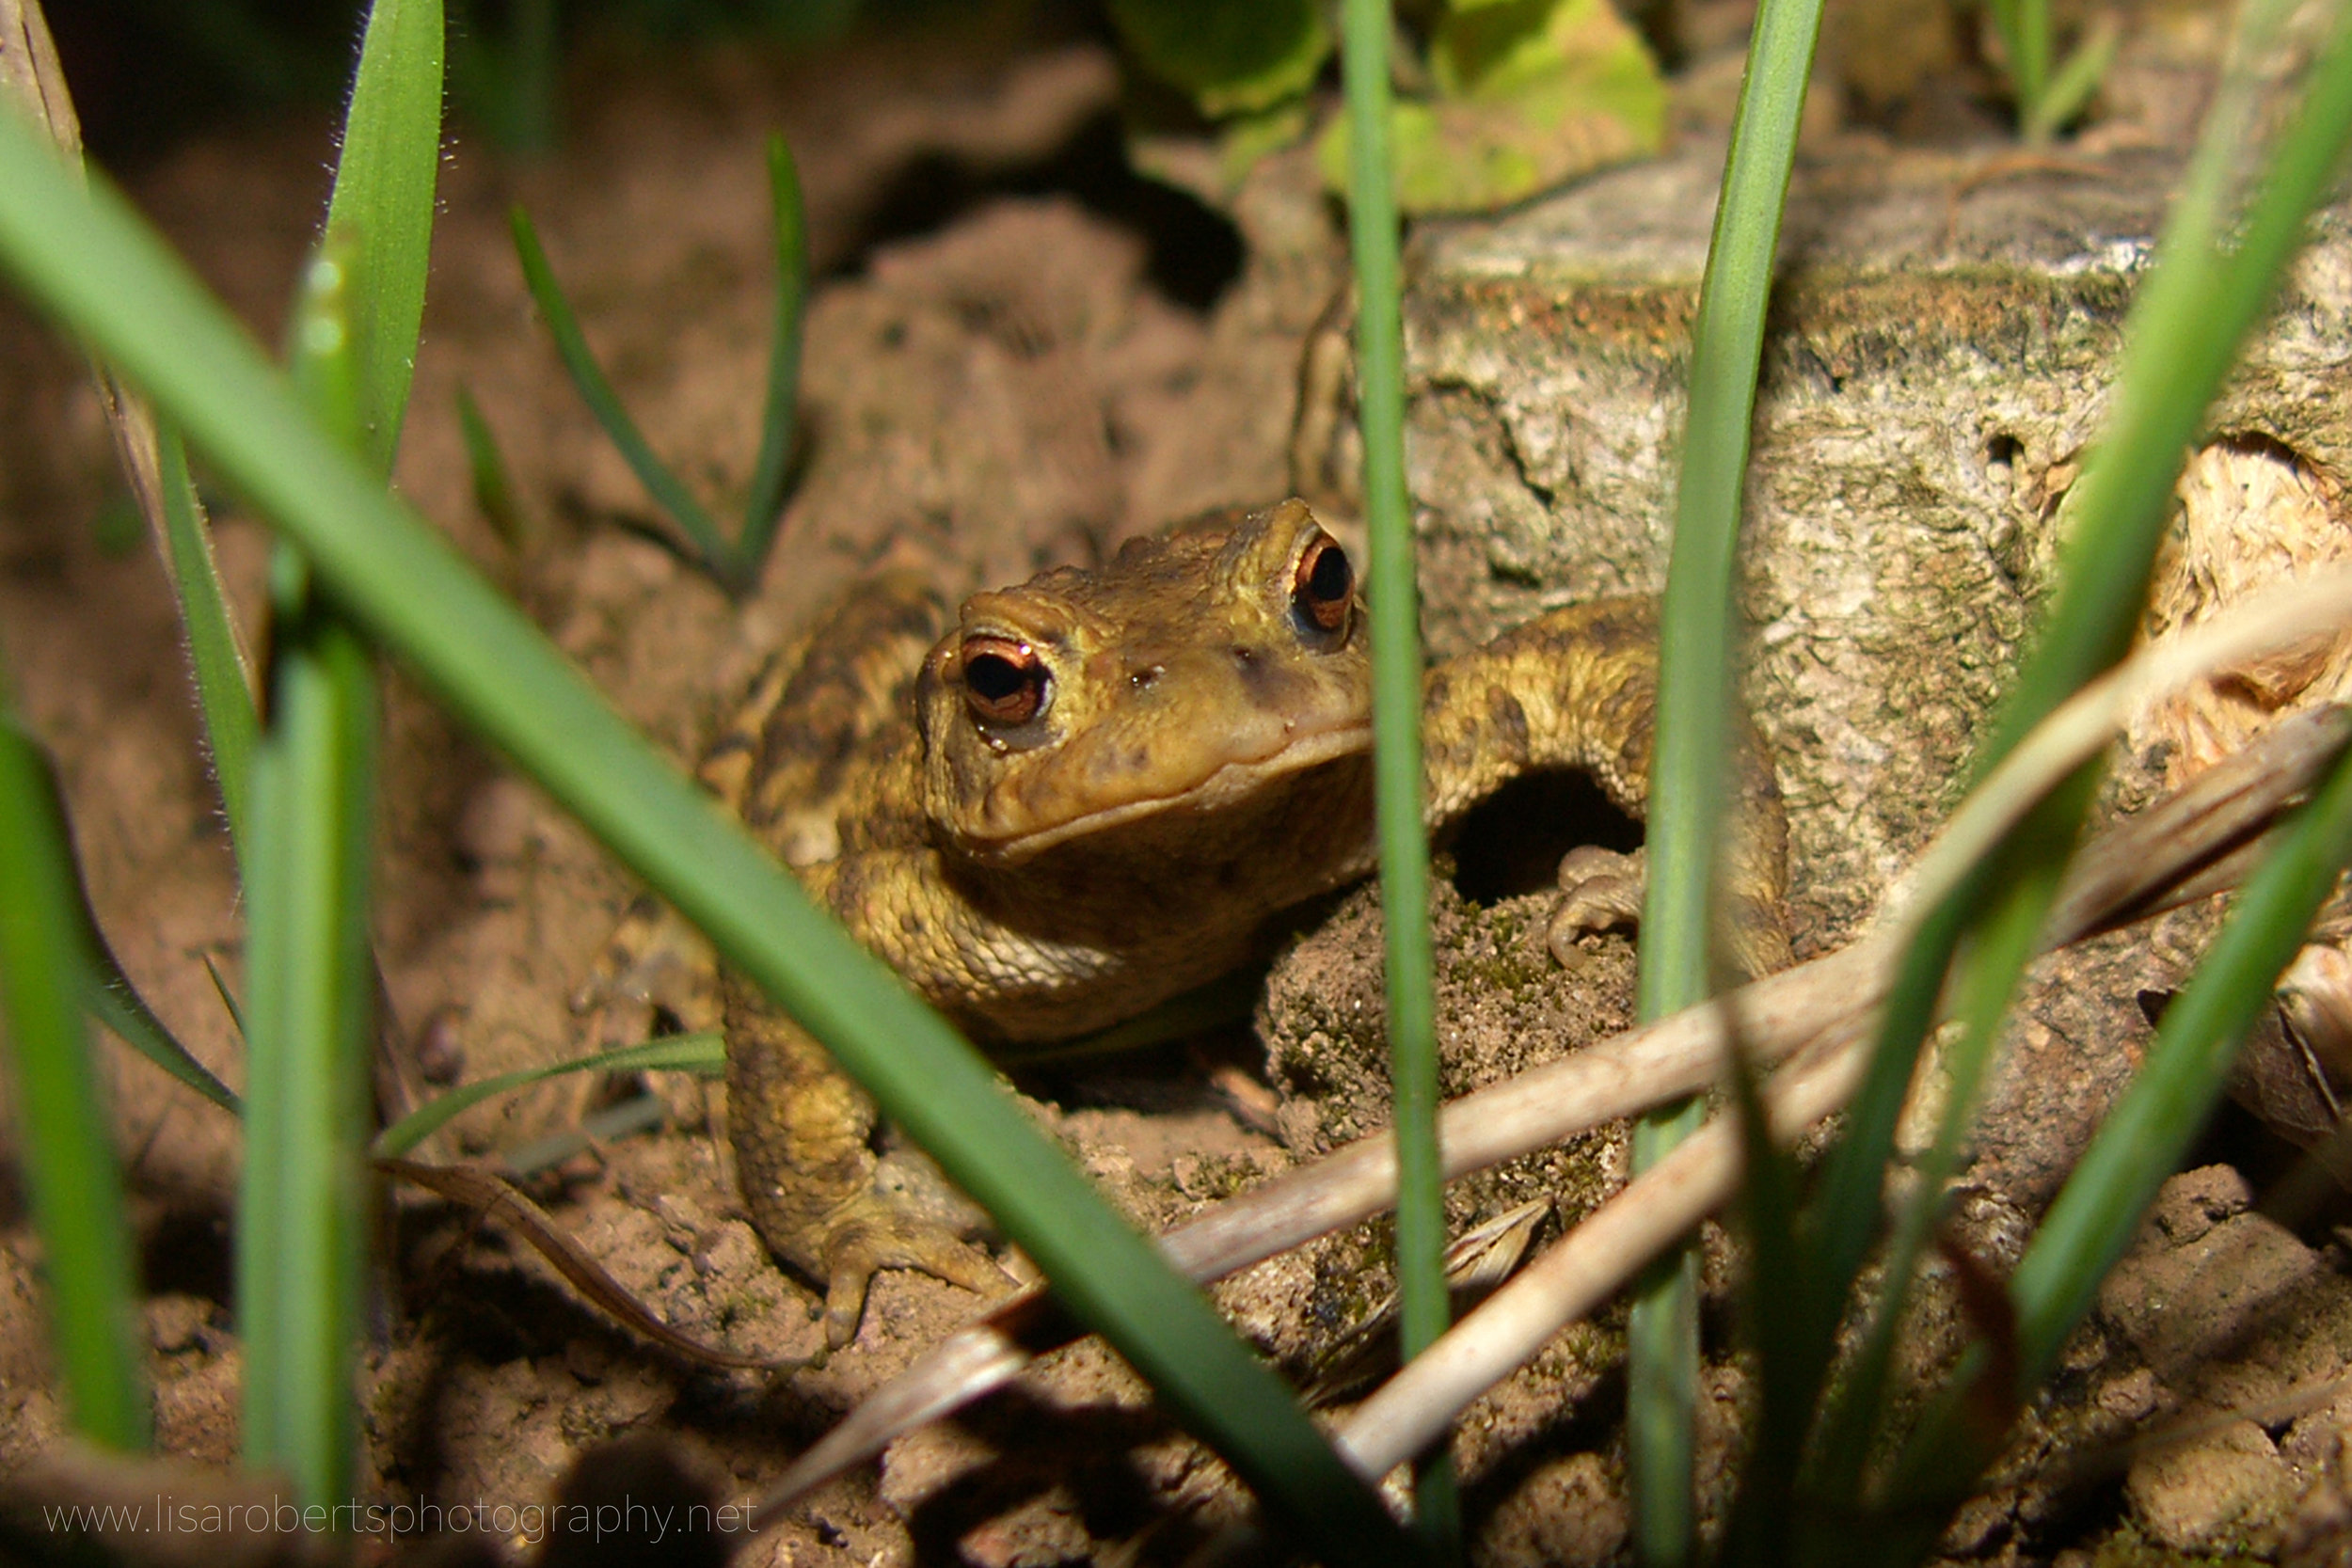  Common Toad face on 